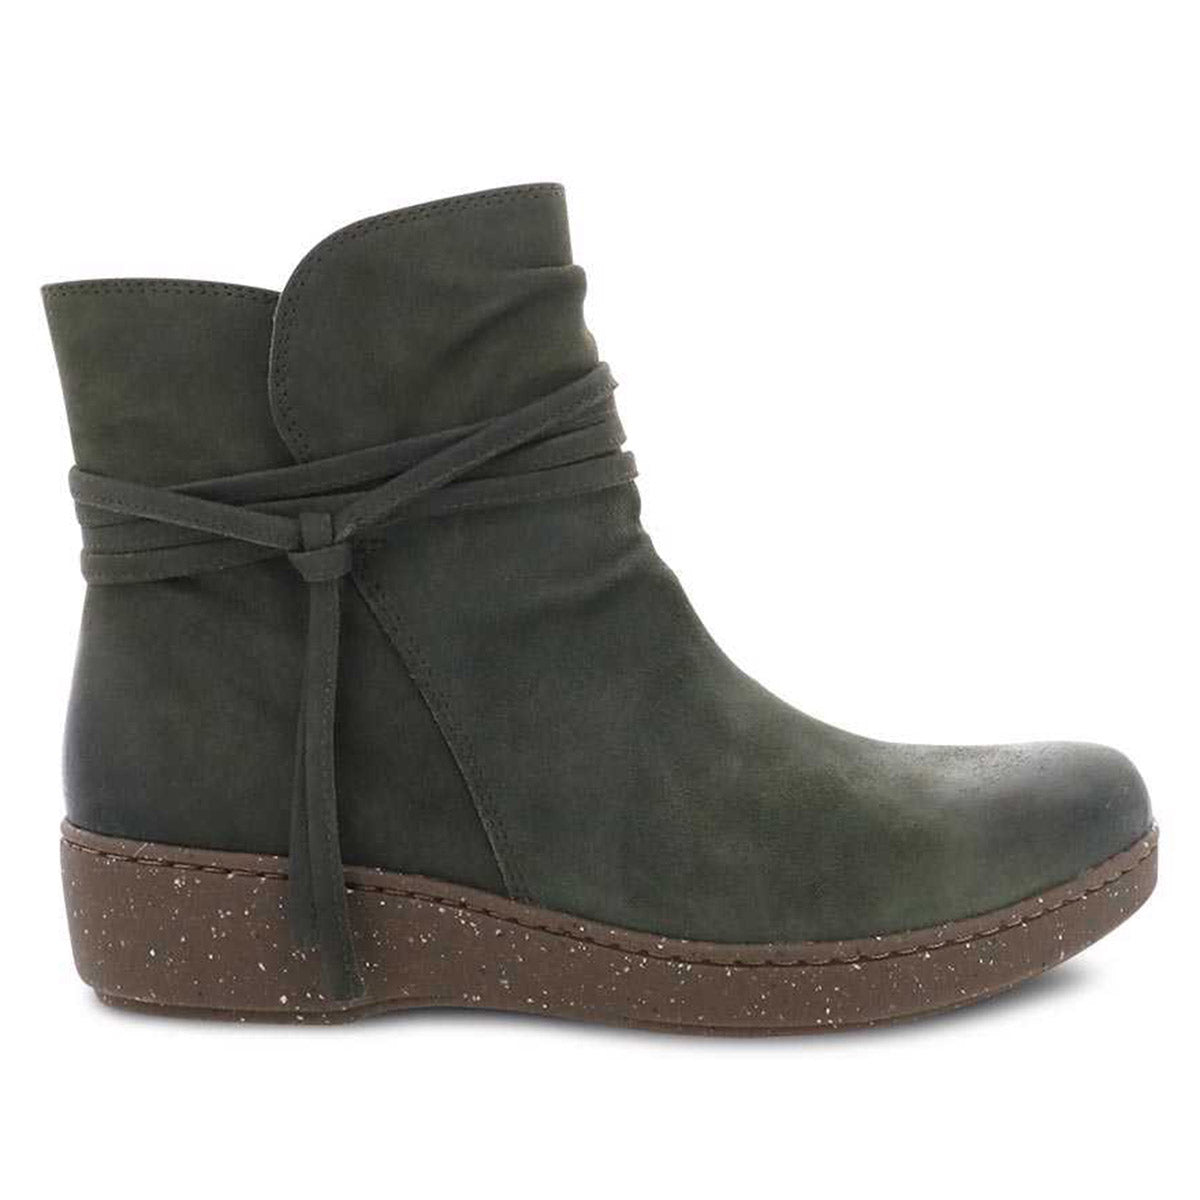 A green Dansko Evelyn Lichen Burnished Suede bootie with a wraparound lace detail, stain resistance, and a low heel.